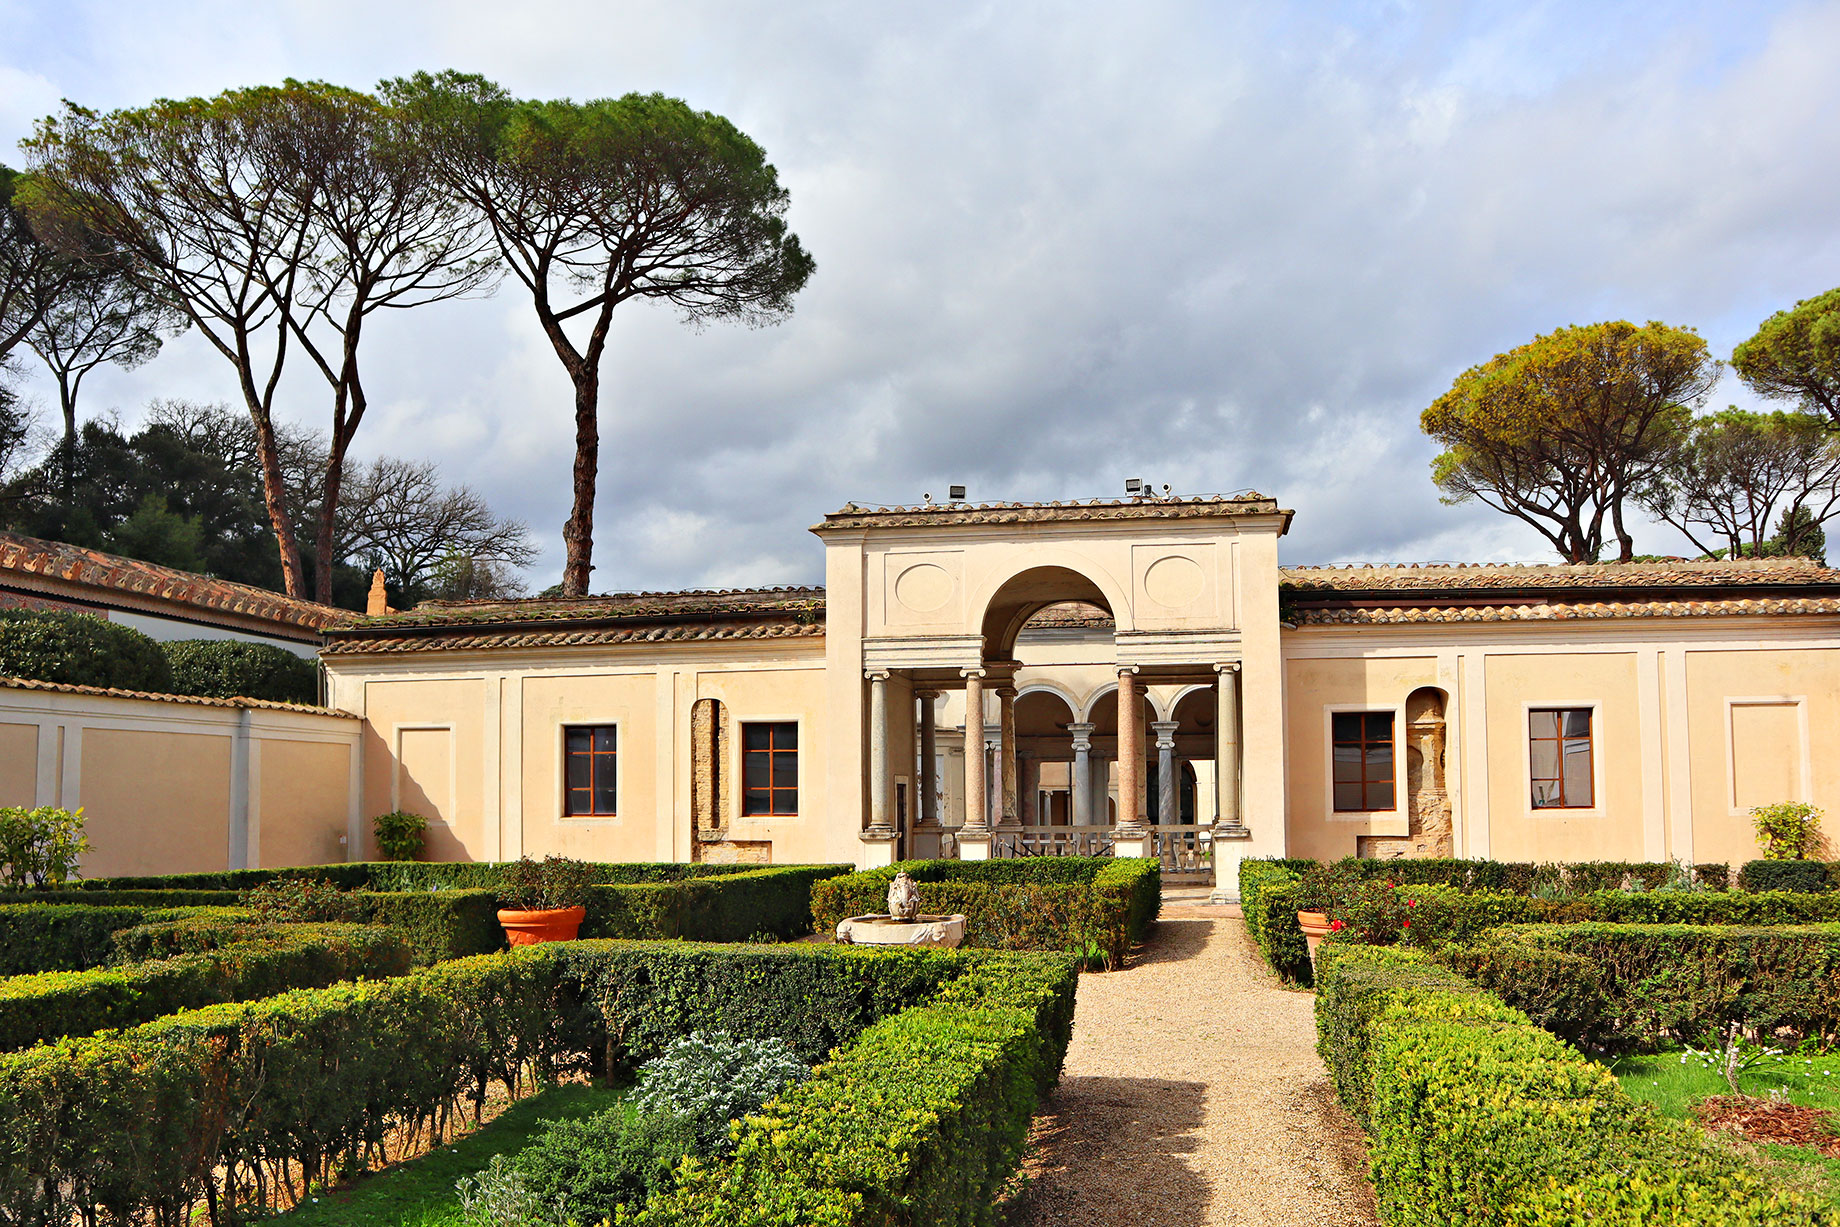 National Etruscan Museum of Villa Giulia – Rome, Italy